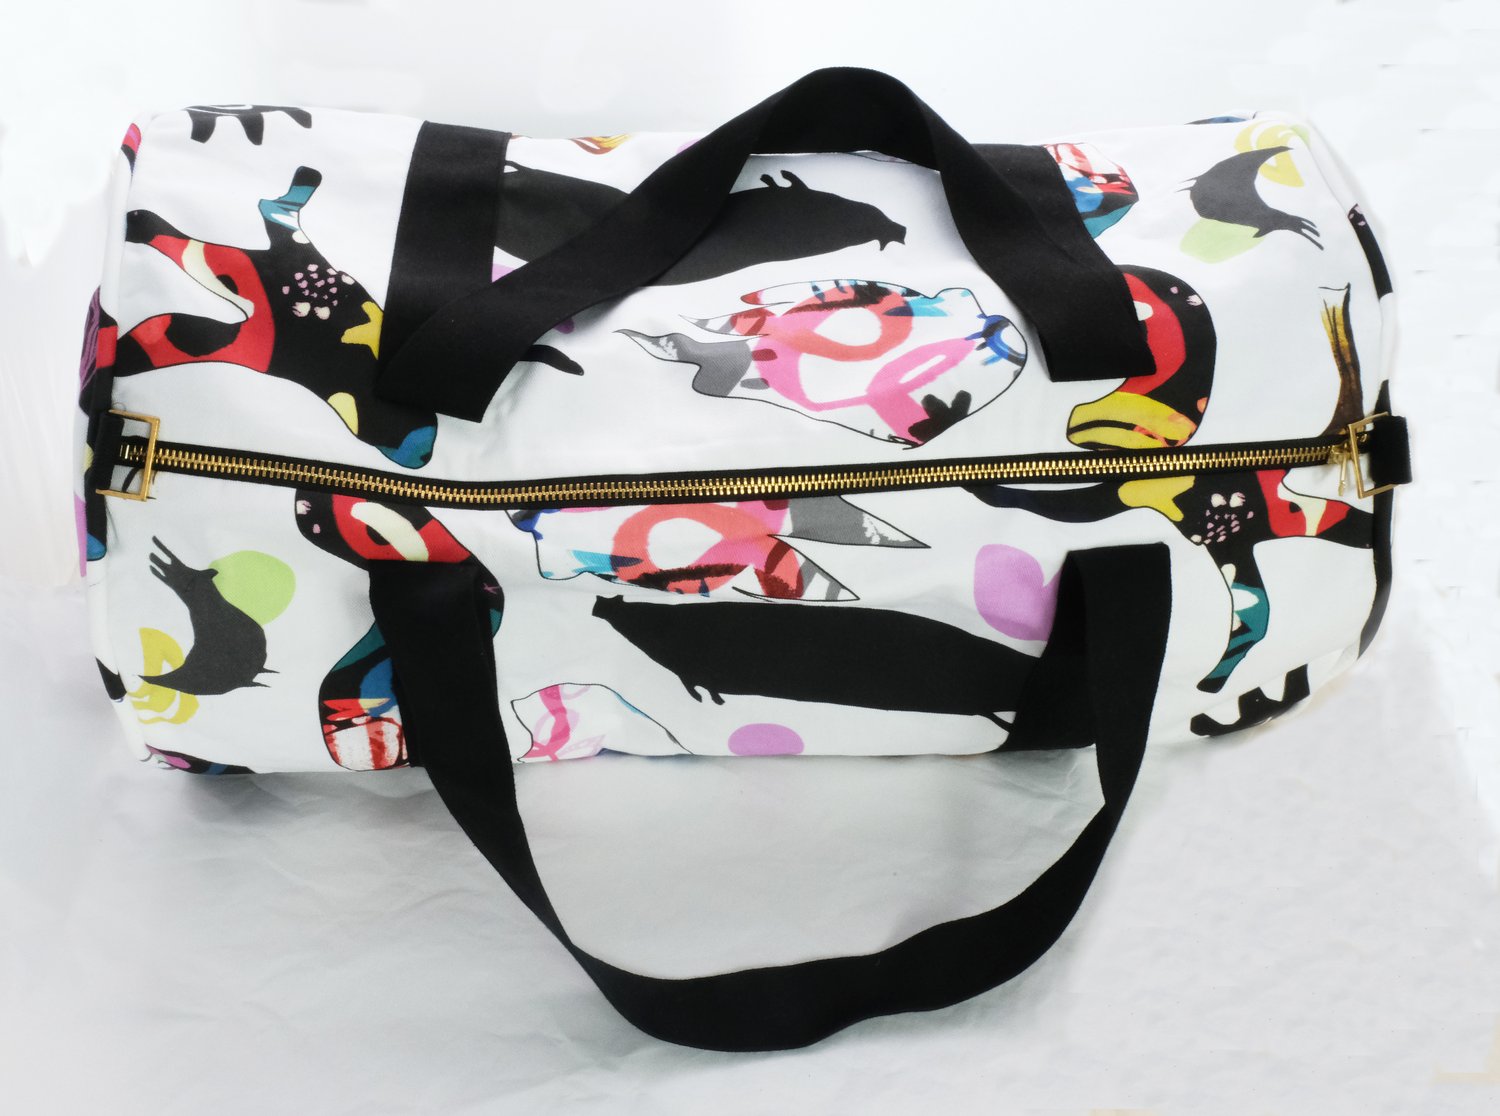 Image of New Cotton Canvas 'Summer Exhibition' Duffle Hold all Bag.